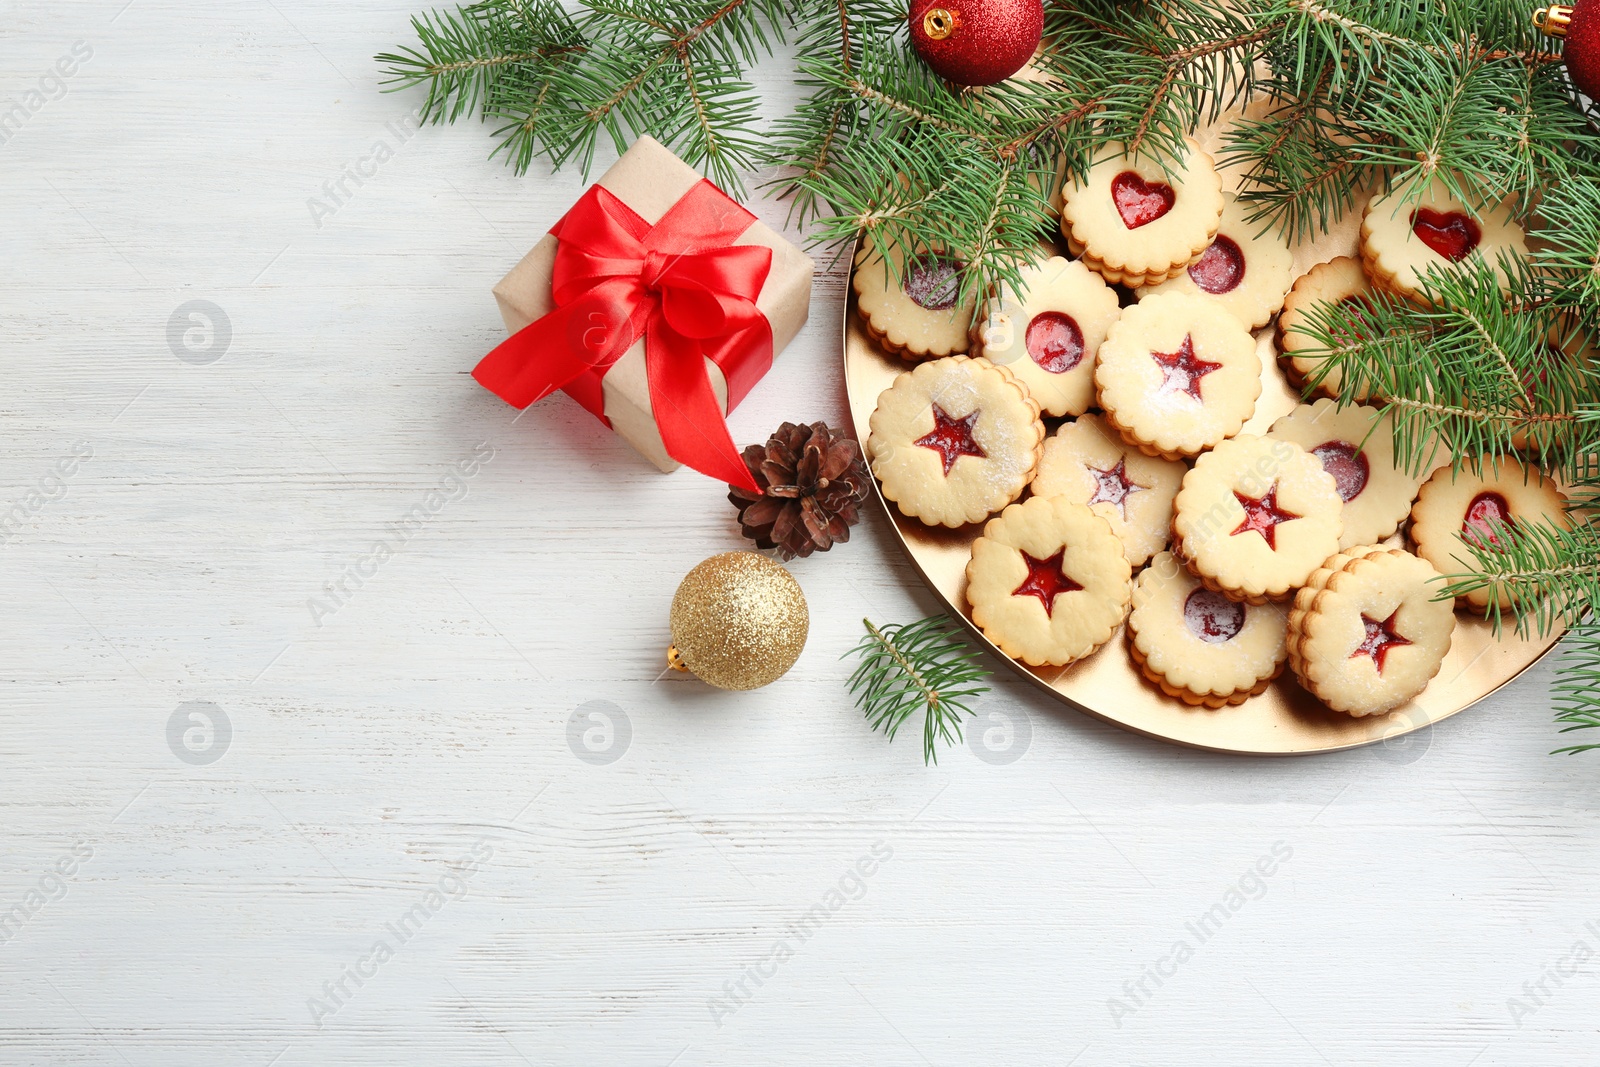 Photo of Christmas decorations and delicious Linzer cookies with sweet jam on wooden background, top view